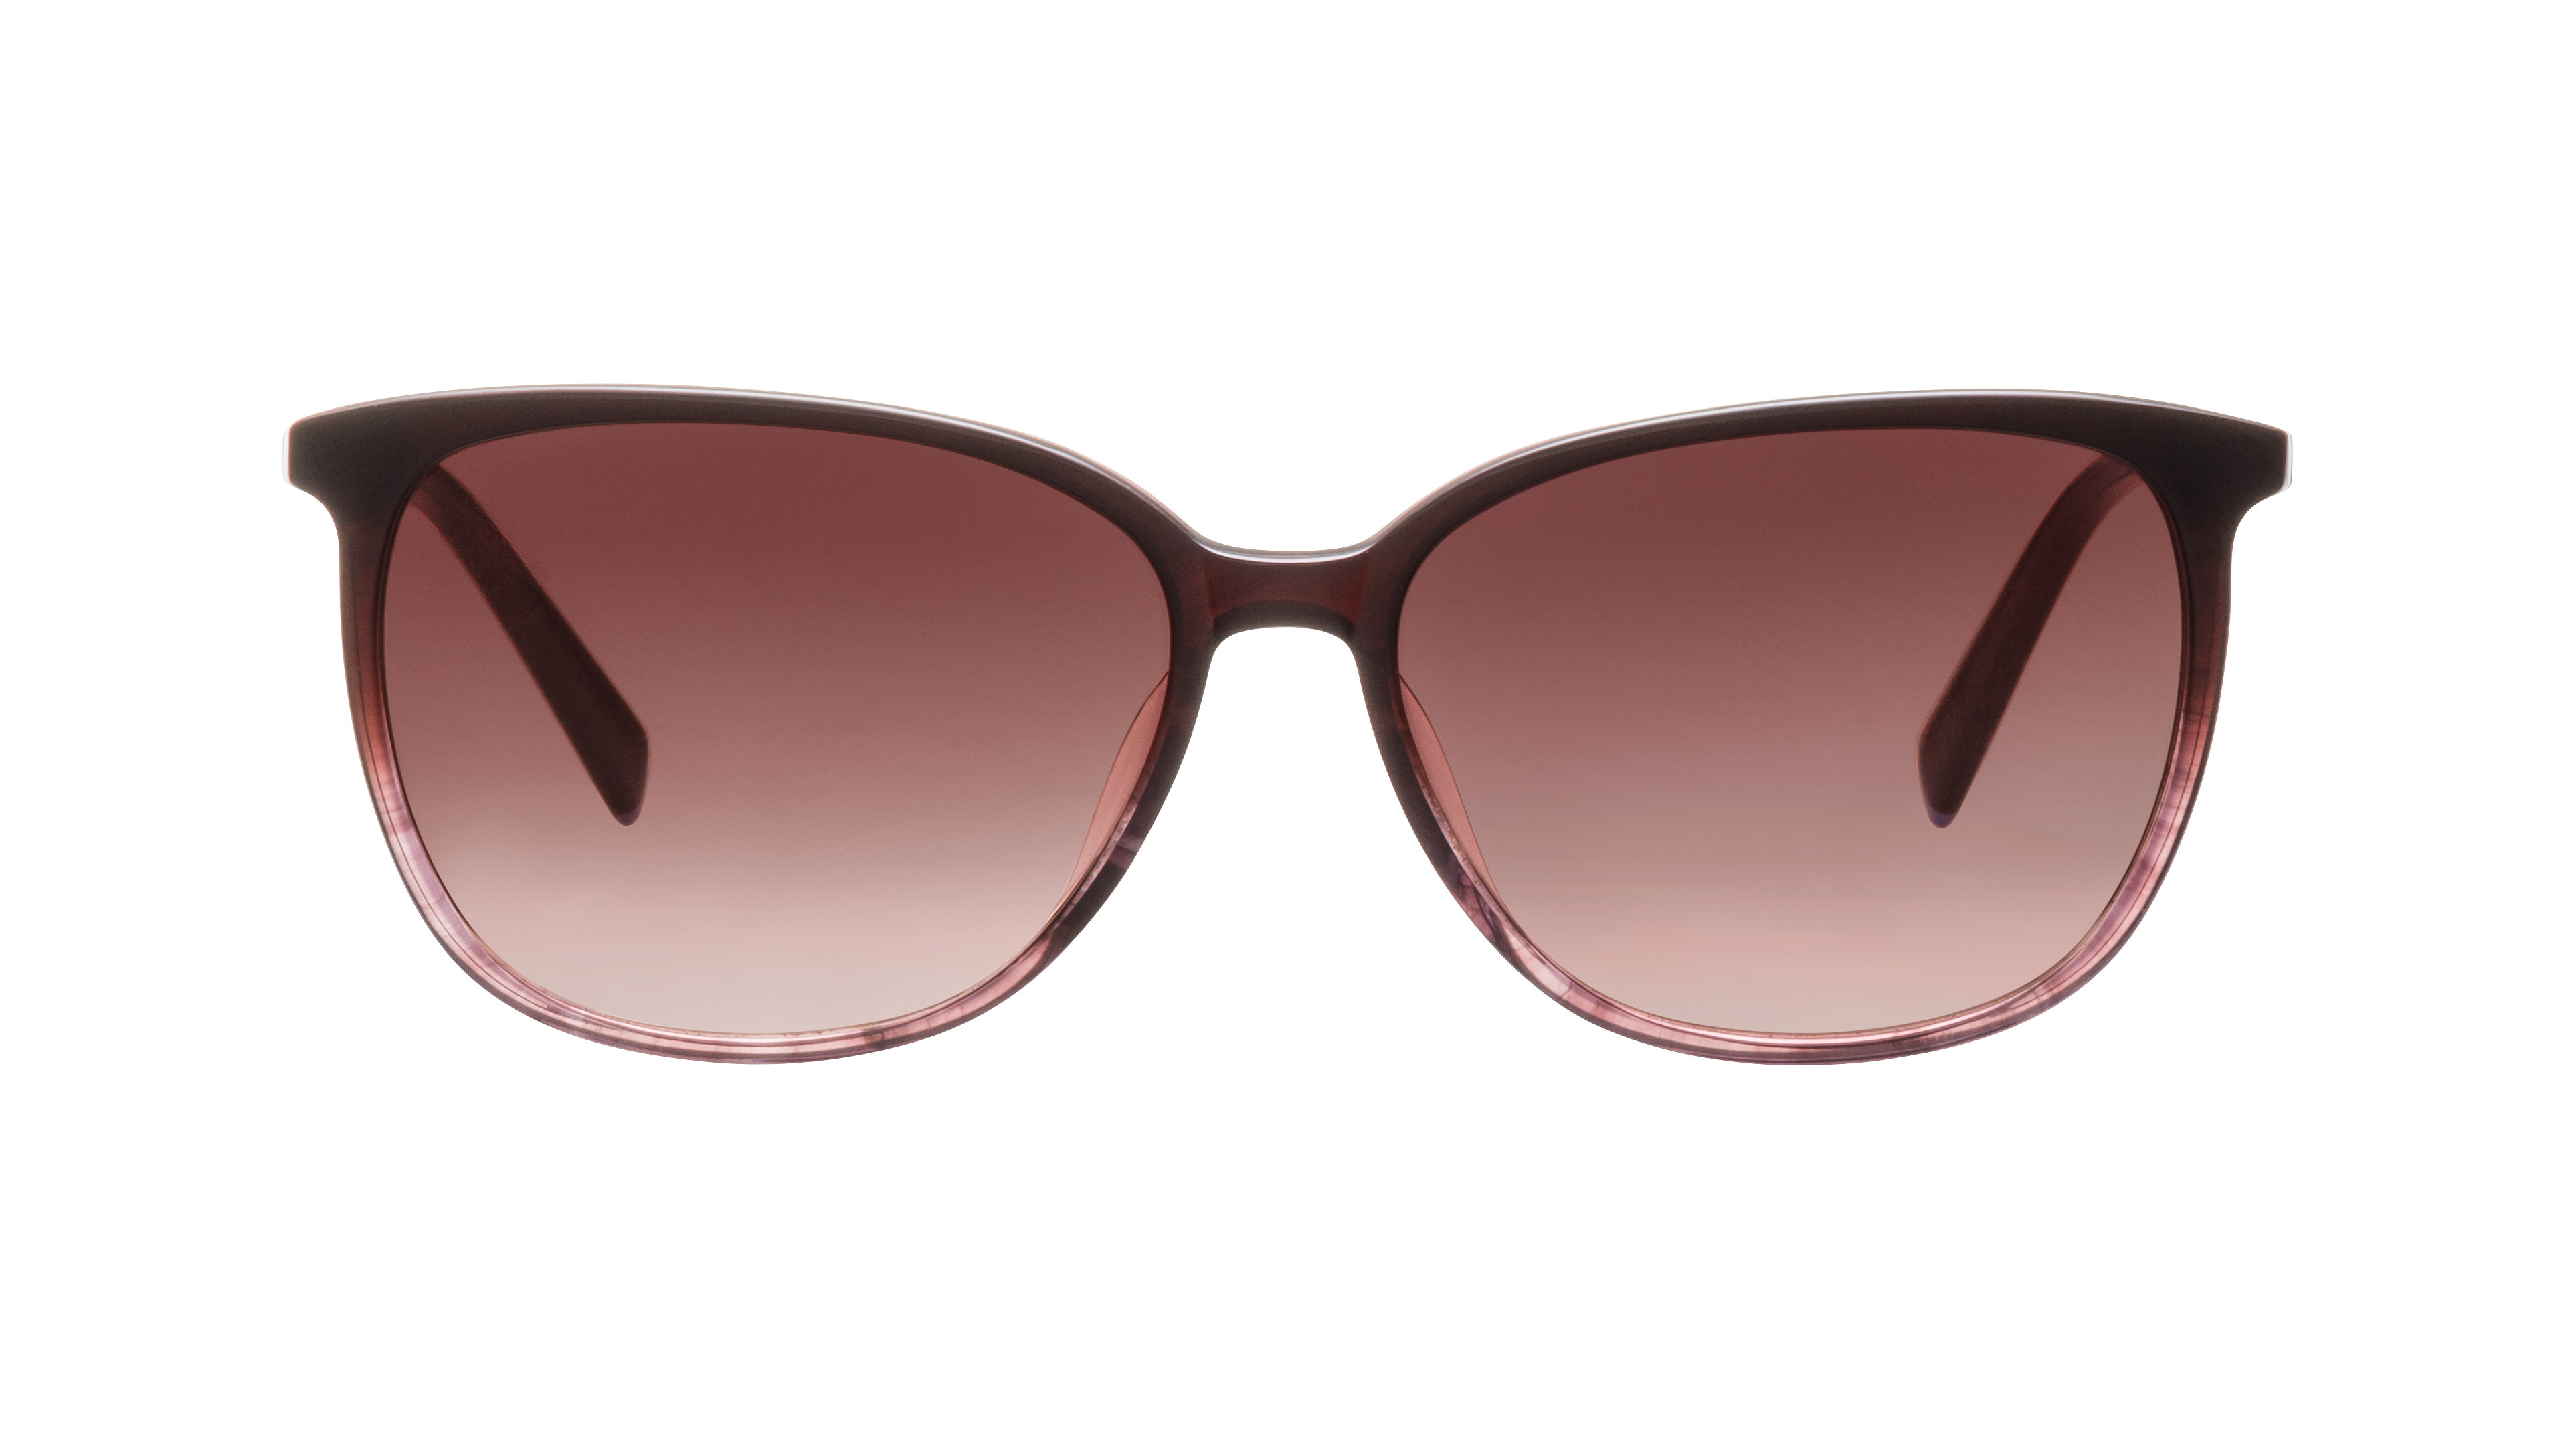 [products.image.front] HUMPHREY´S eyewear 588136 60 Sonnenbrille